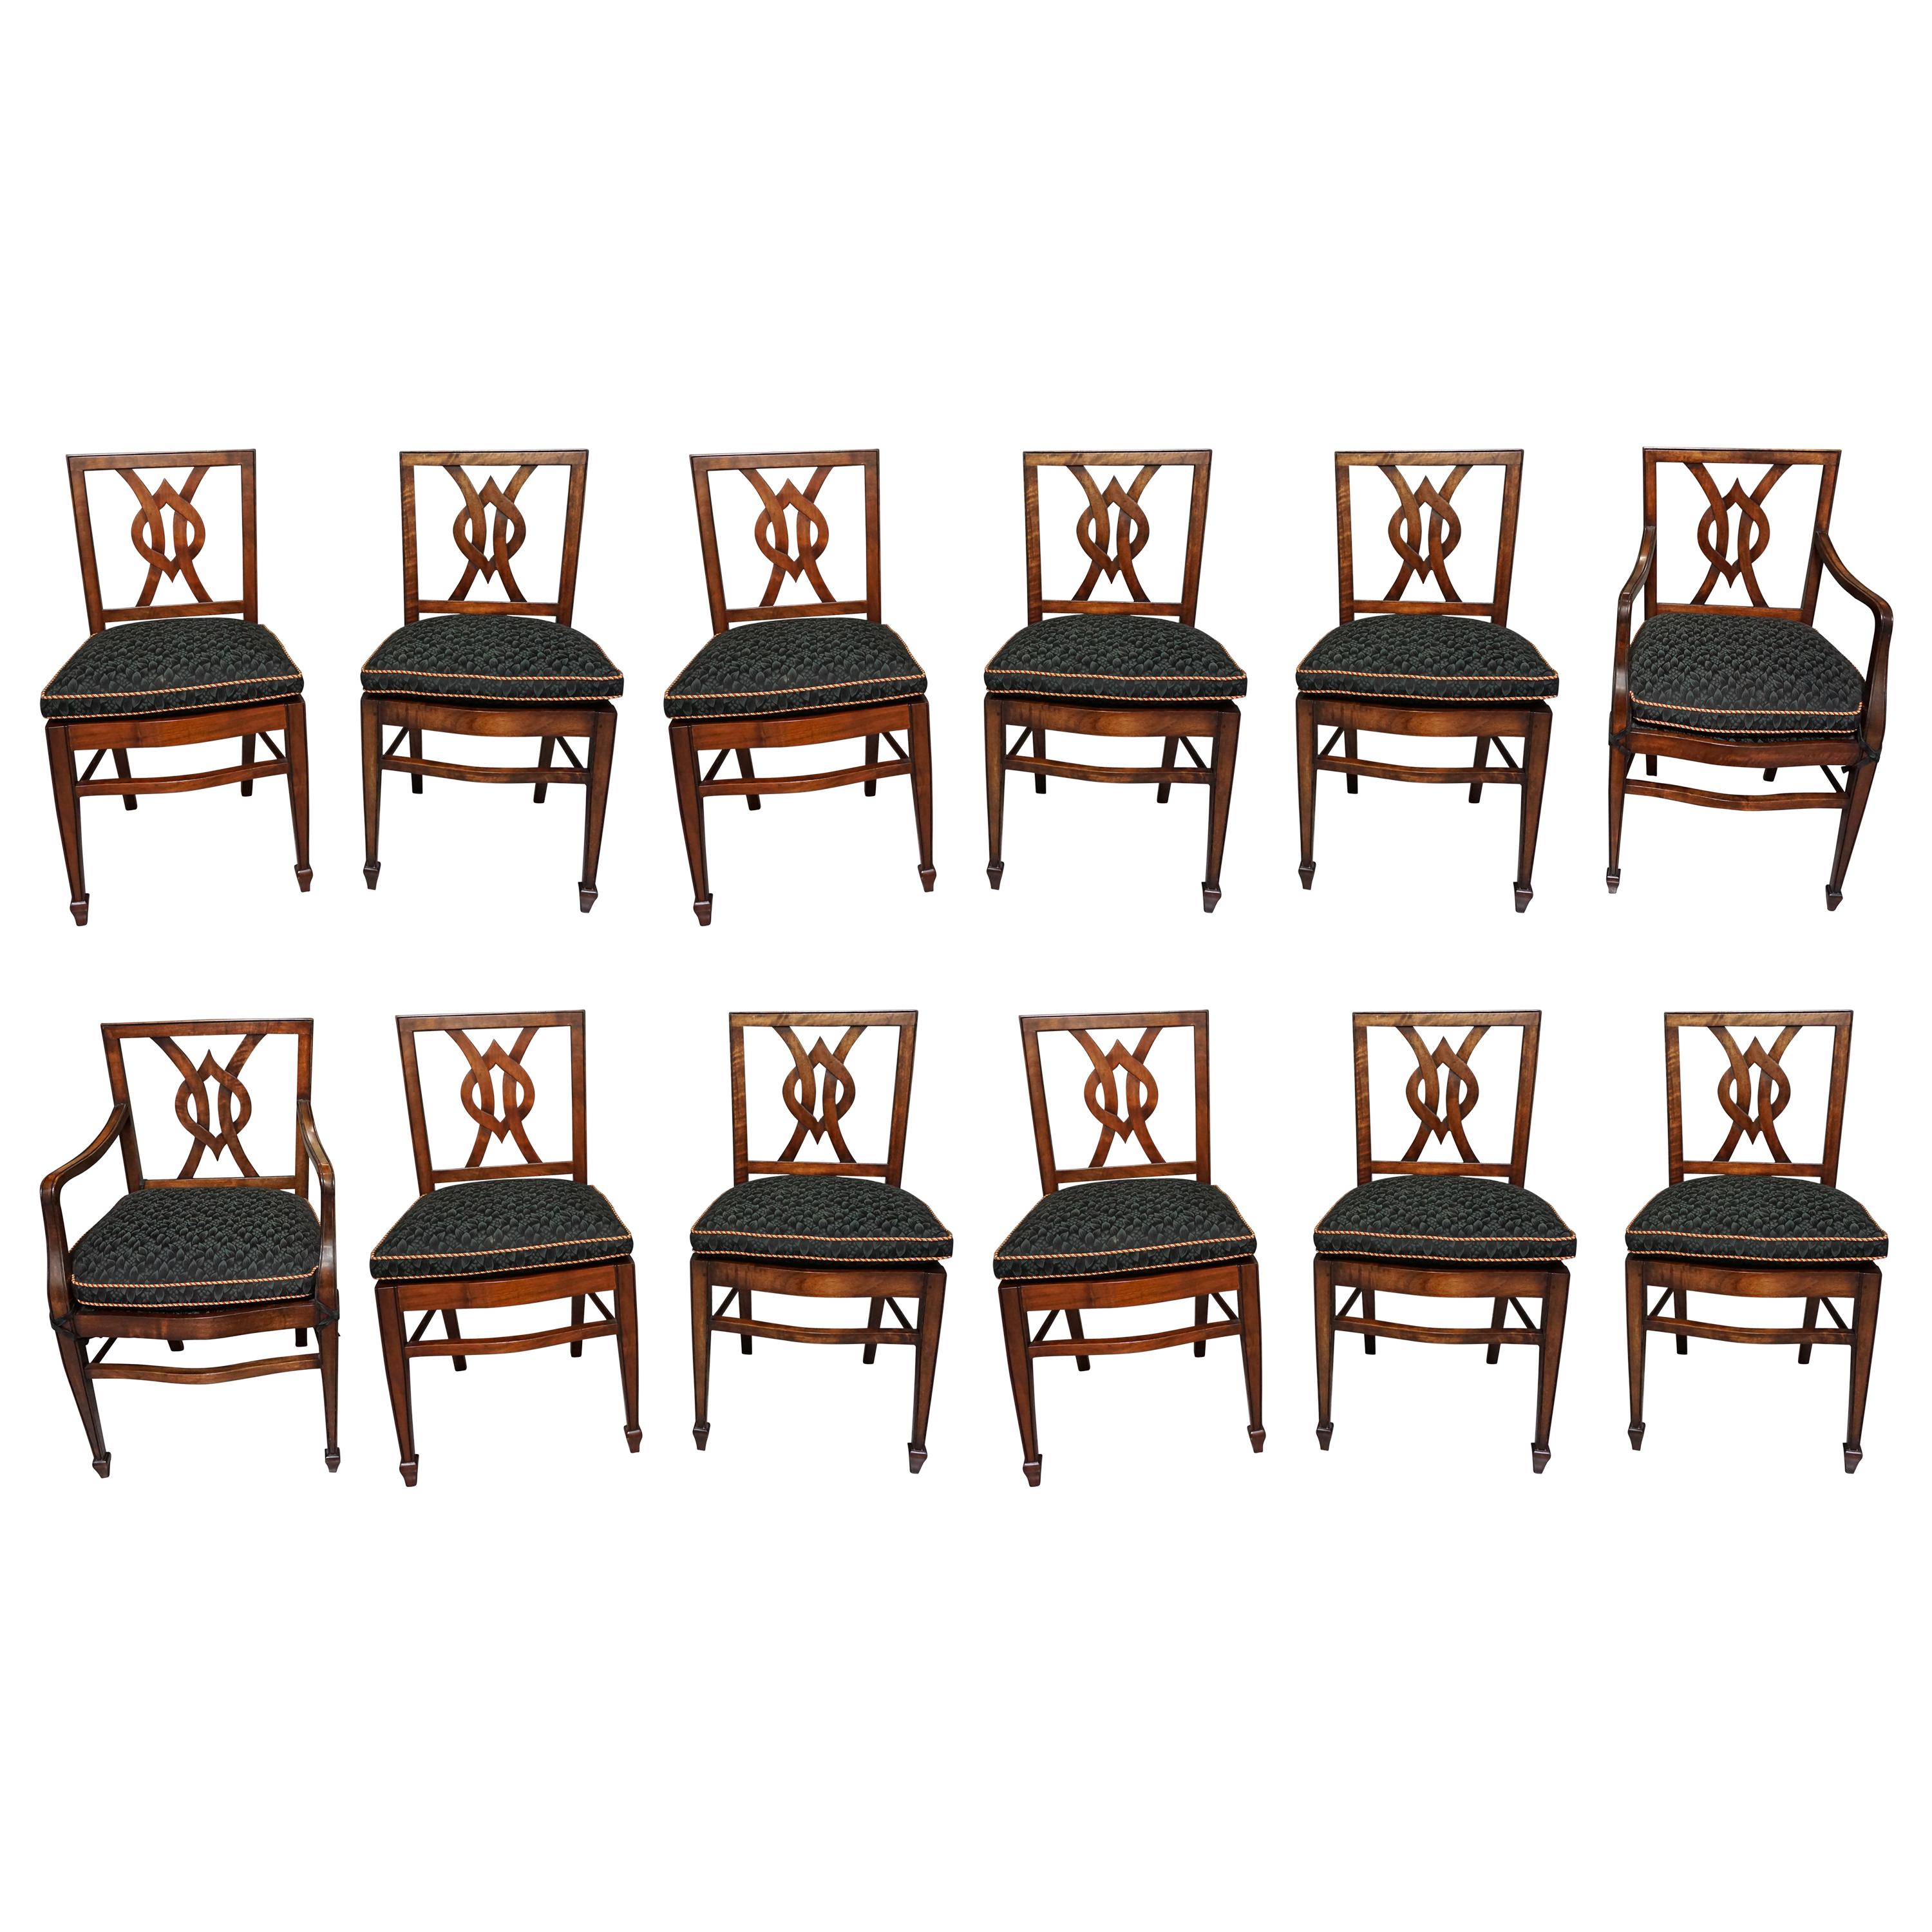 Set of 12 Mahogany Dining Chairs in the Neoclassical Taste